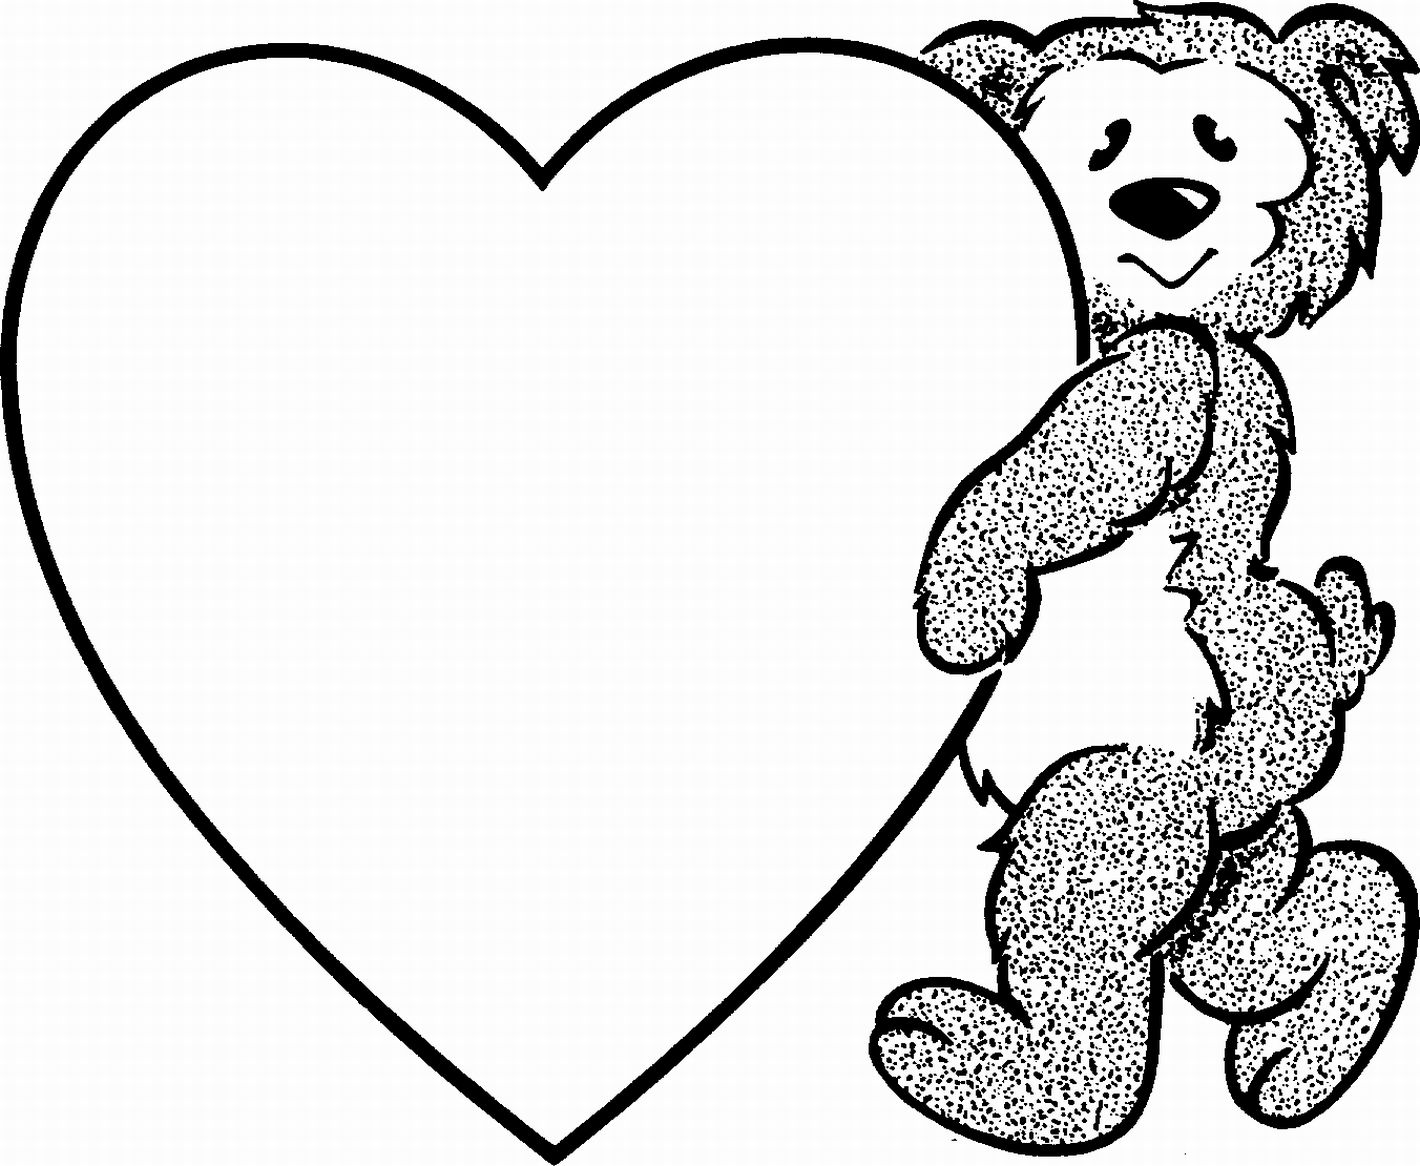 printable images of valentine hearts free valentine39s day hearts coloring page the frugal fairy printable hearts valentine images of 